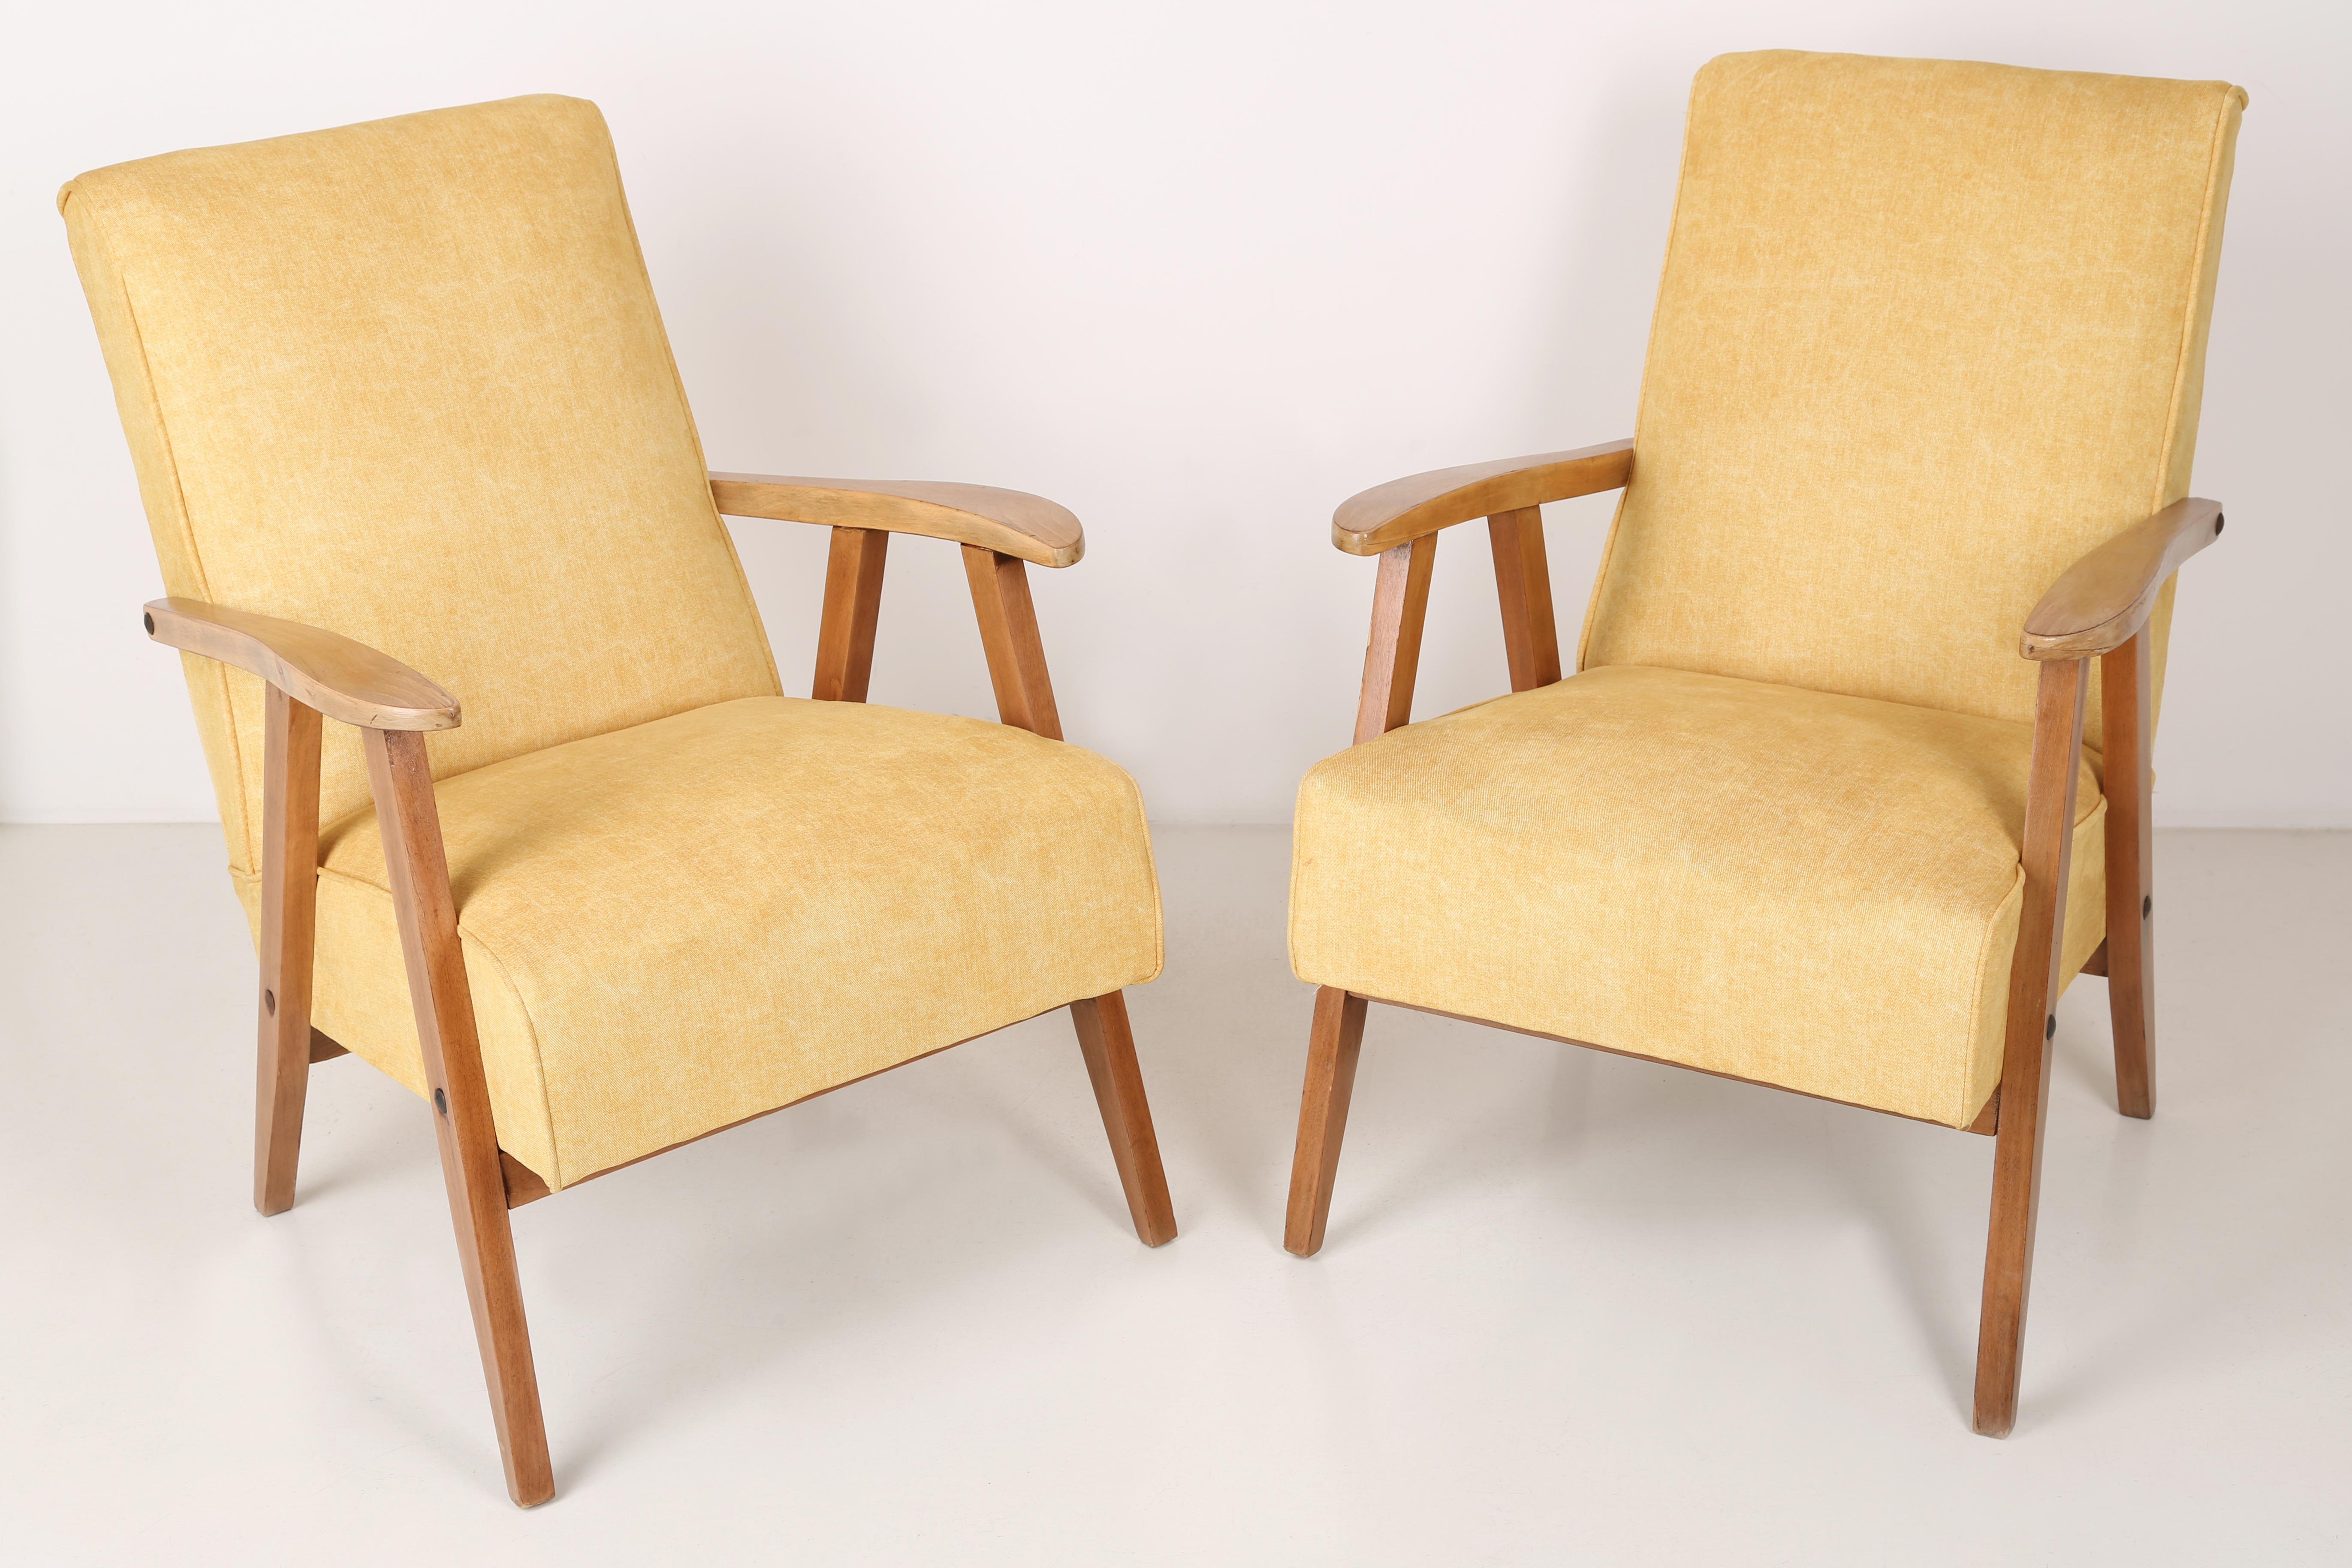 A beautiful, comfortable VAR-type armchair, made in the 1960s in Poland. A very comfortable spring seat. The armchair underwent a full carpentry and upholstery renovation. We can prepare this set also in another color.